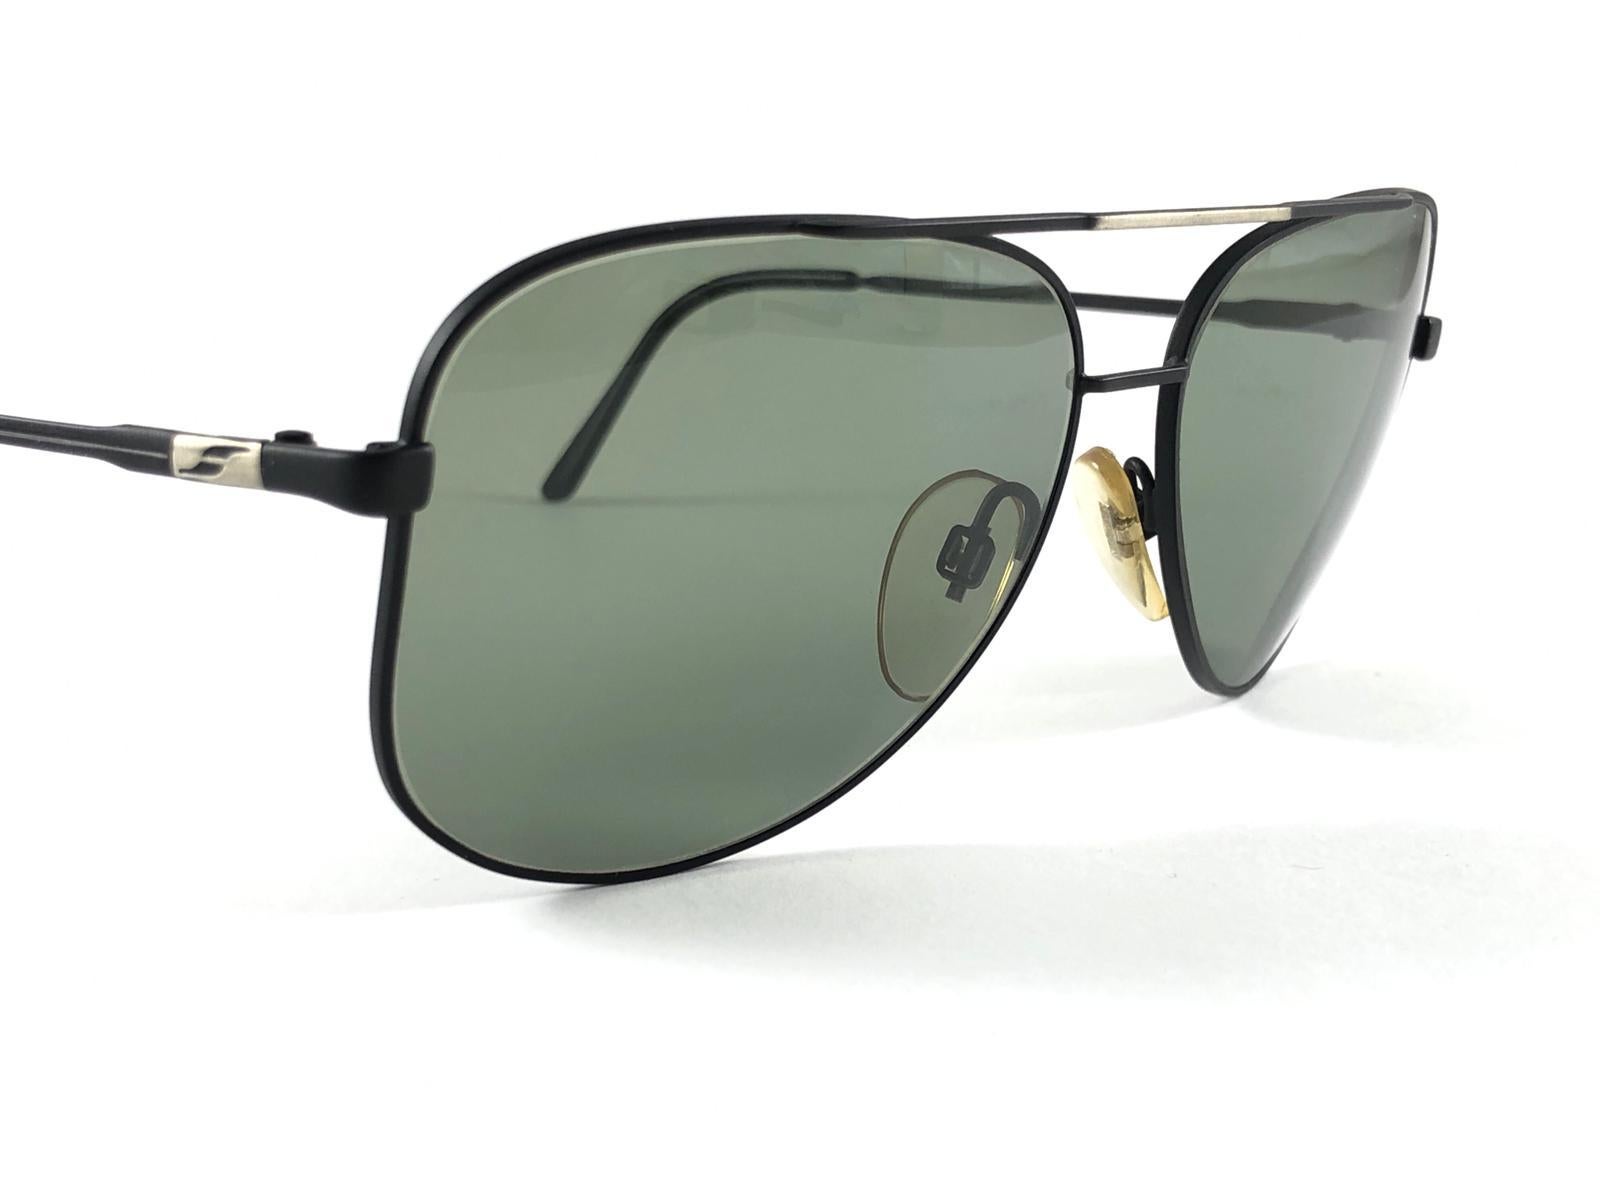 New Vintage Safilo Sporting 86 003 Black Mate Aviator 1980's Sunglasses In New Condition For Sale In Baleares, Baleares